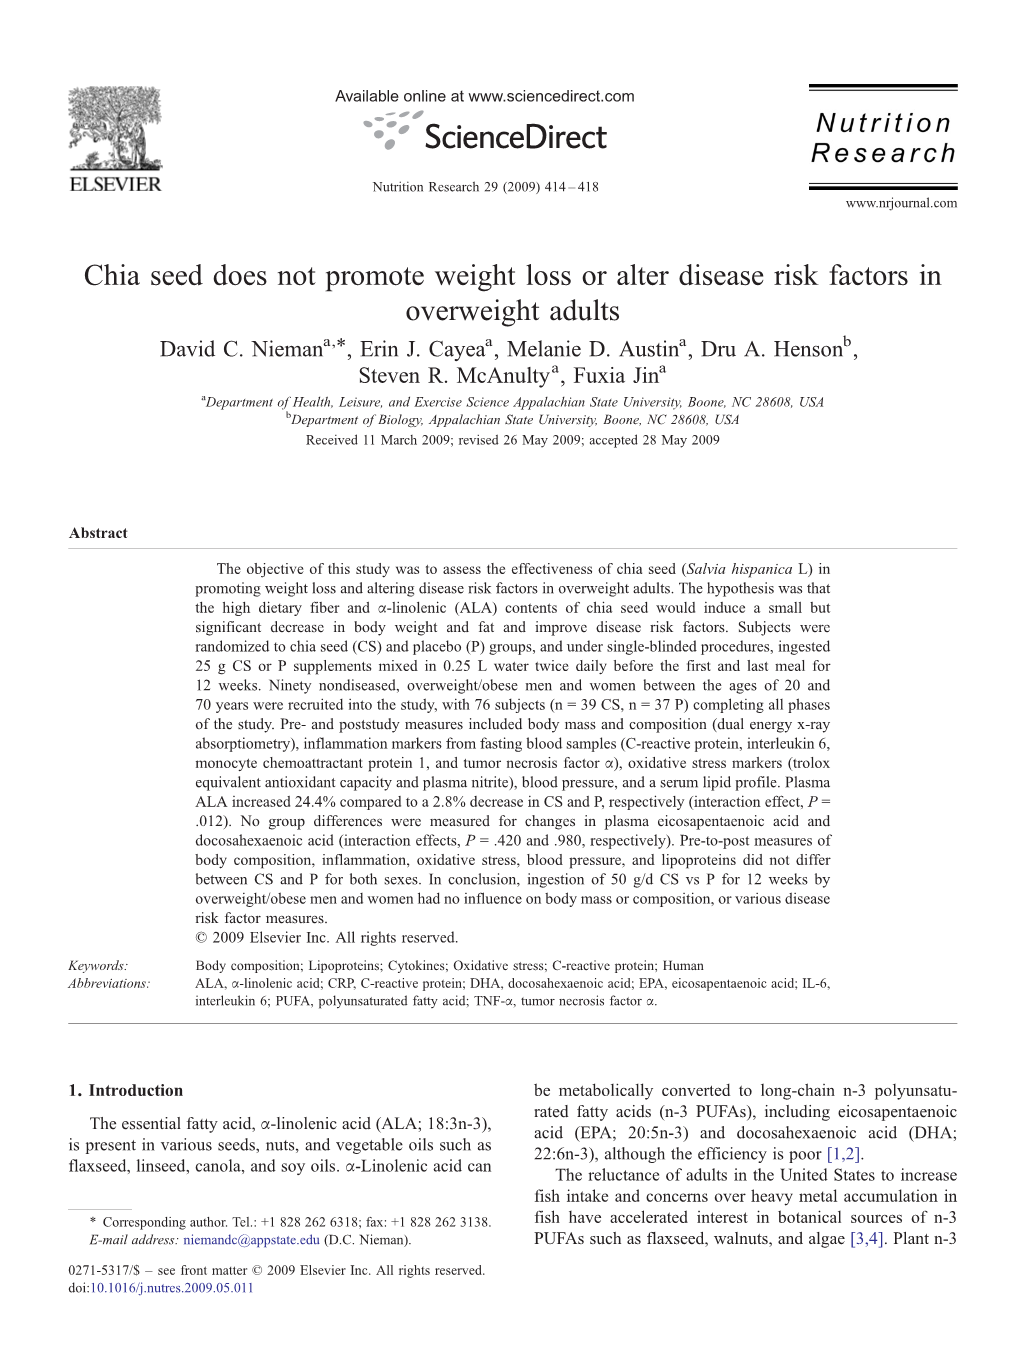 Chia Seed Does Not Promote Weight Loss Or Alter Disease Risk Factors in Overweight Adults ⁎ David C